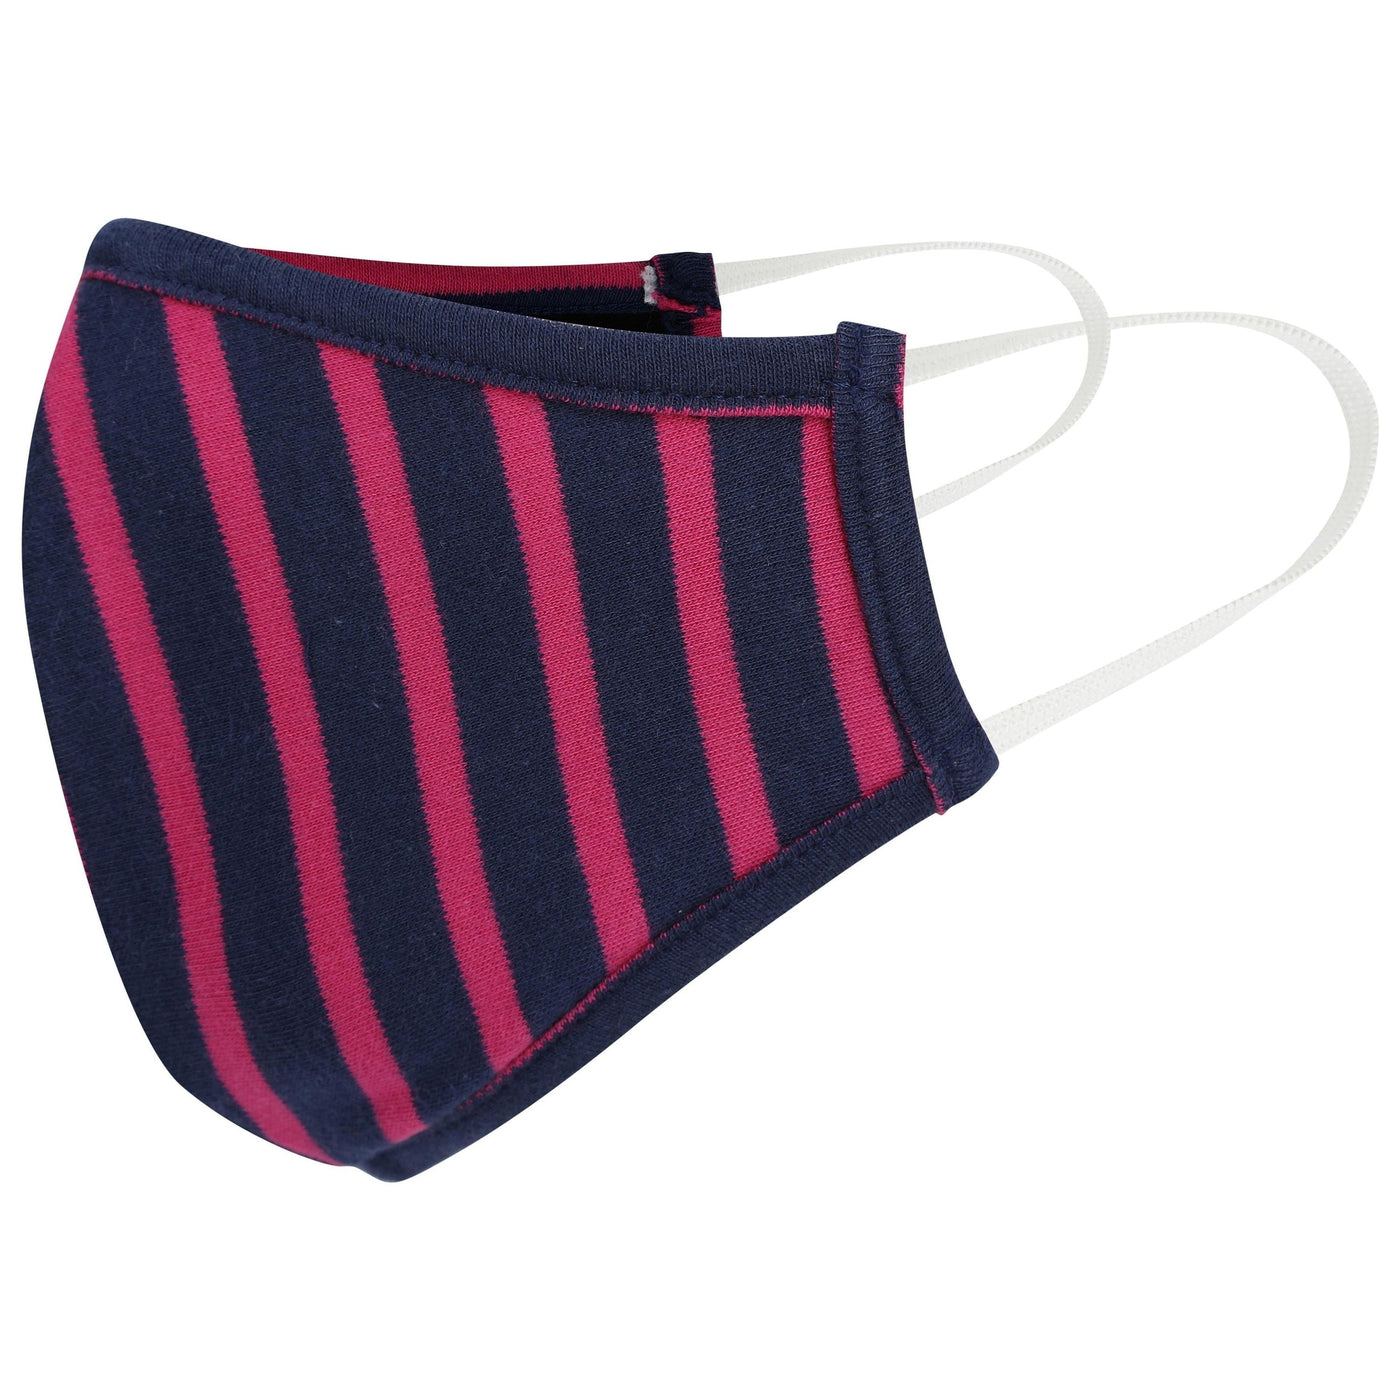 Piccalilly Adult's Face Covering - Pink Stripe